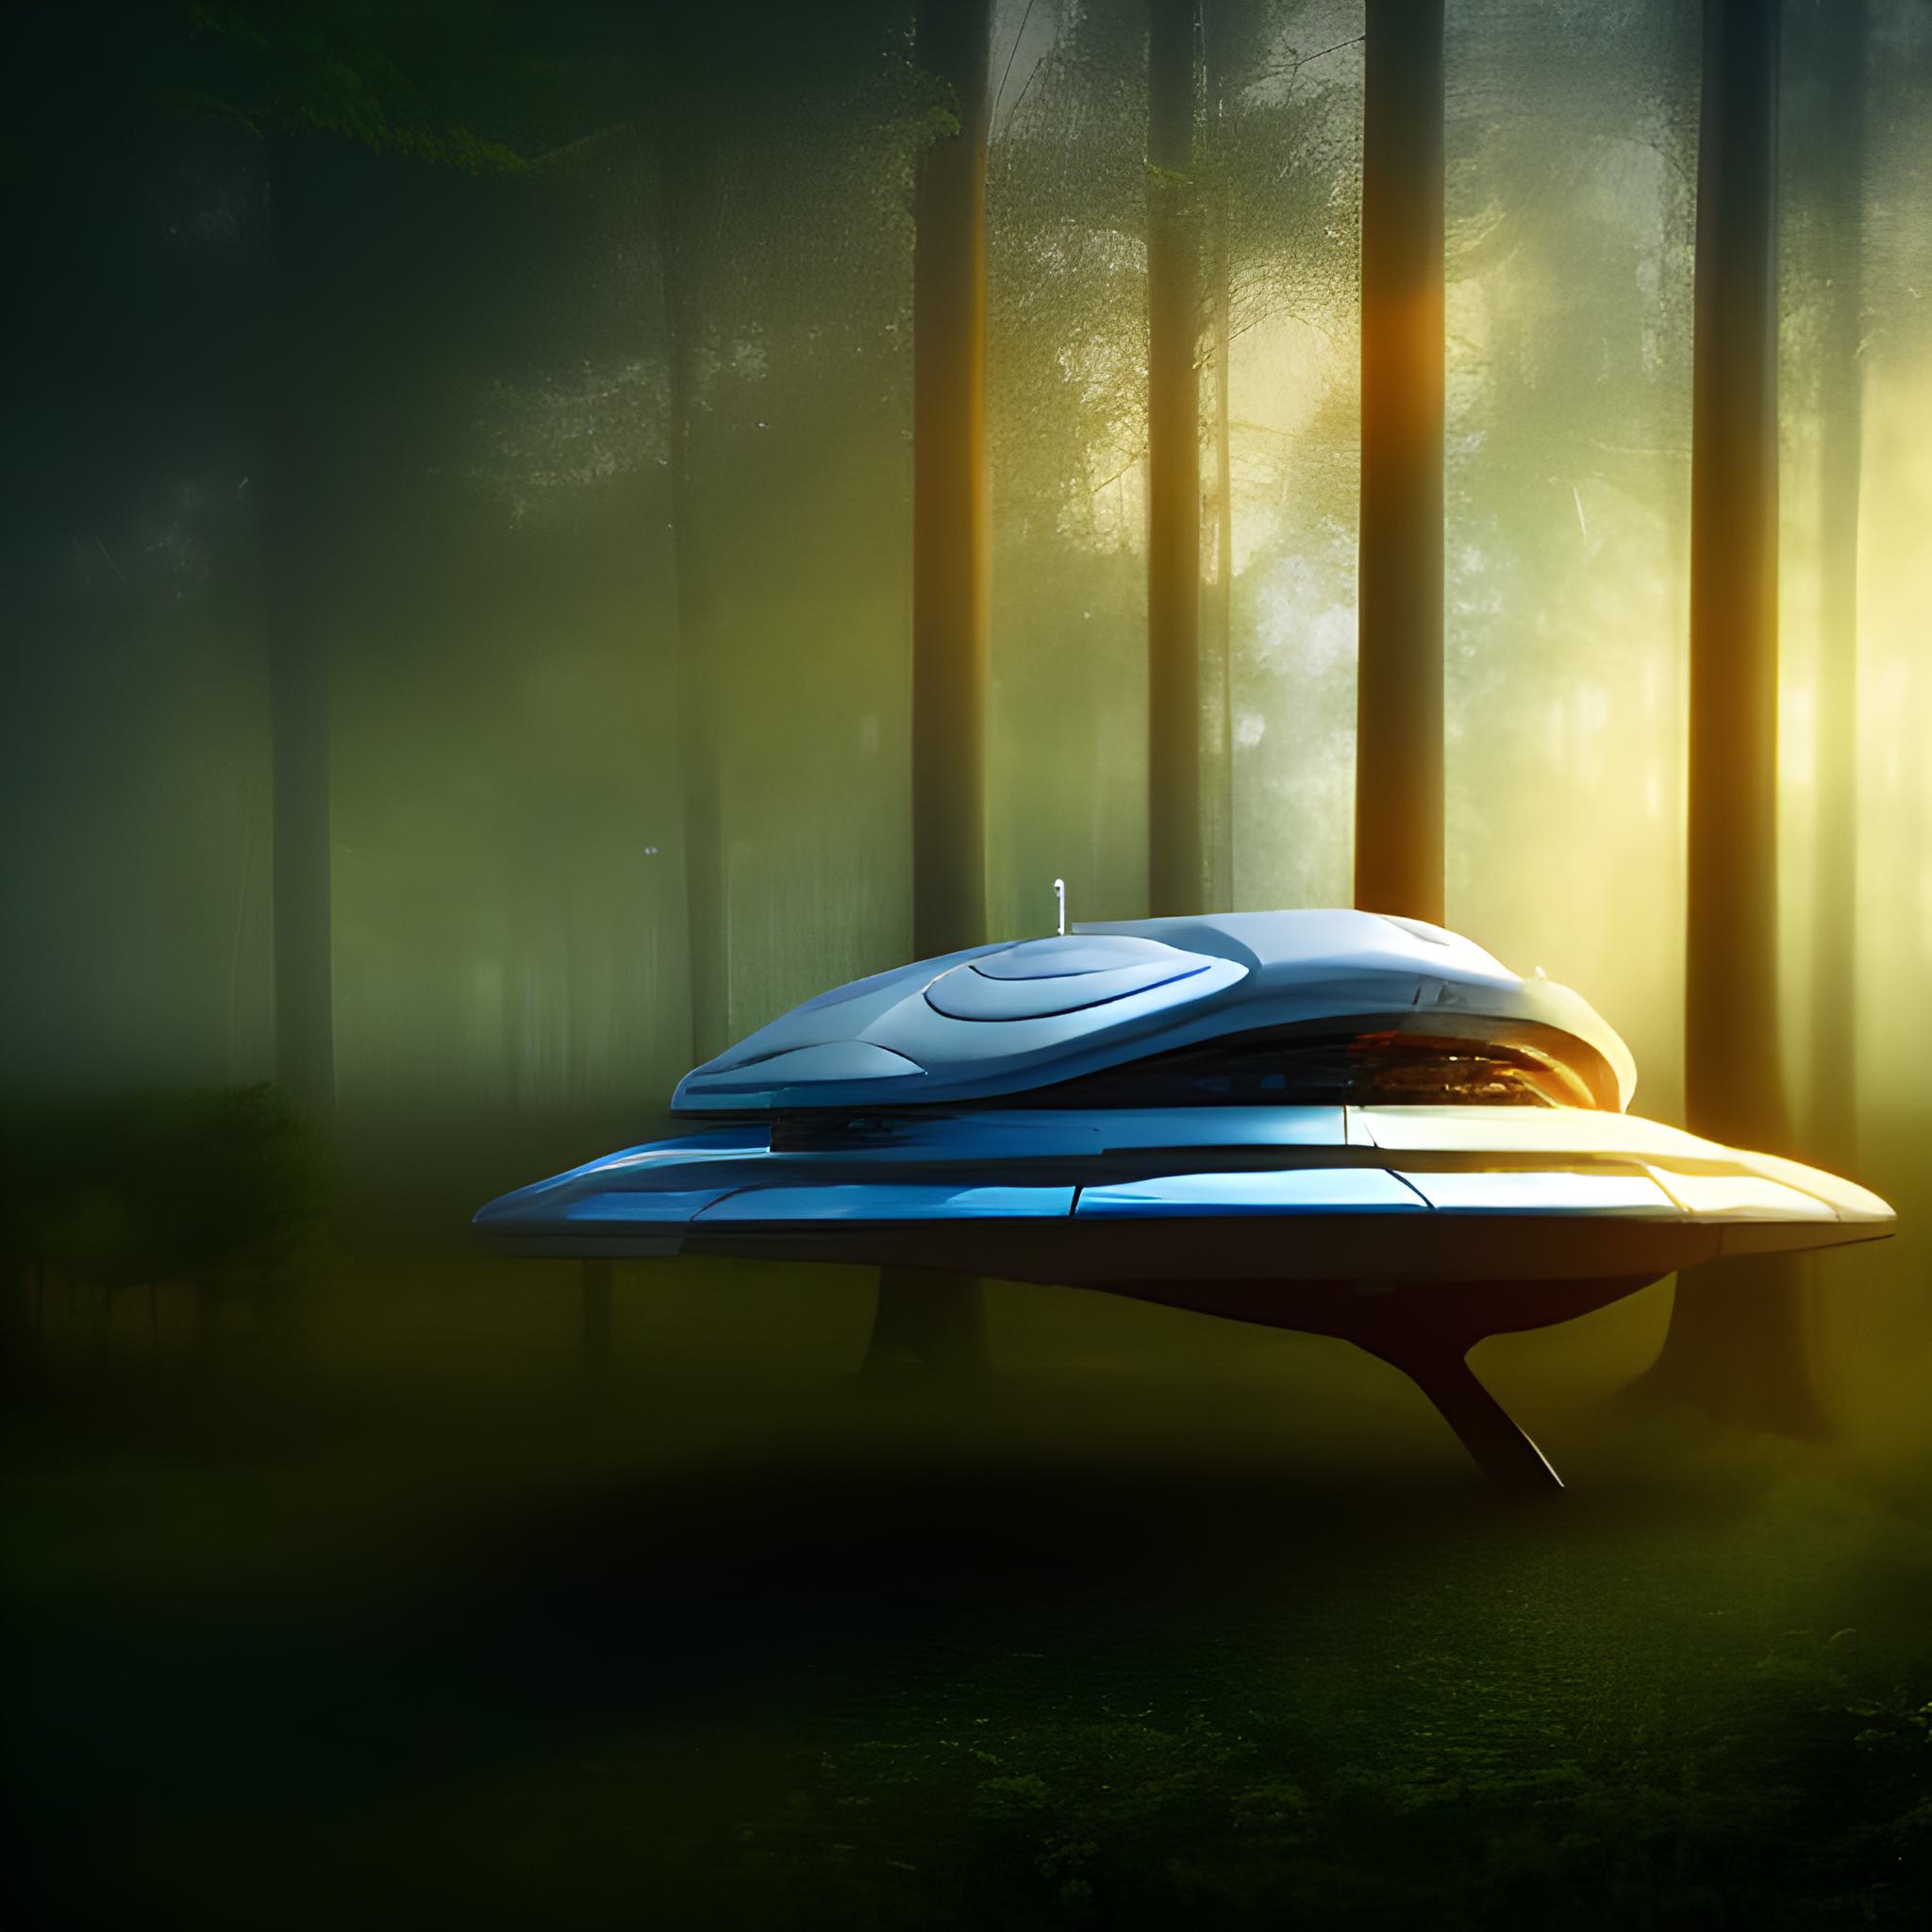 Exploration spaceship landed in misty forest